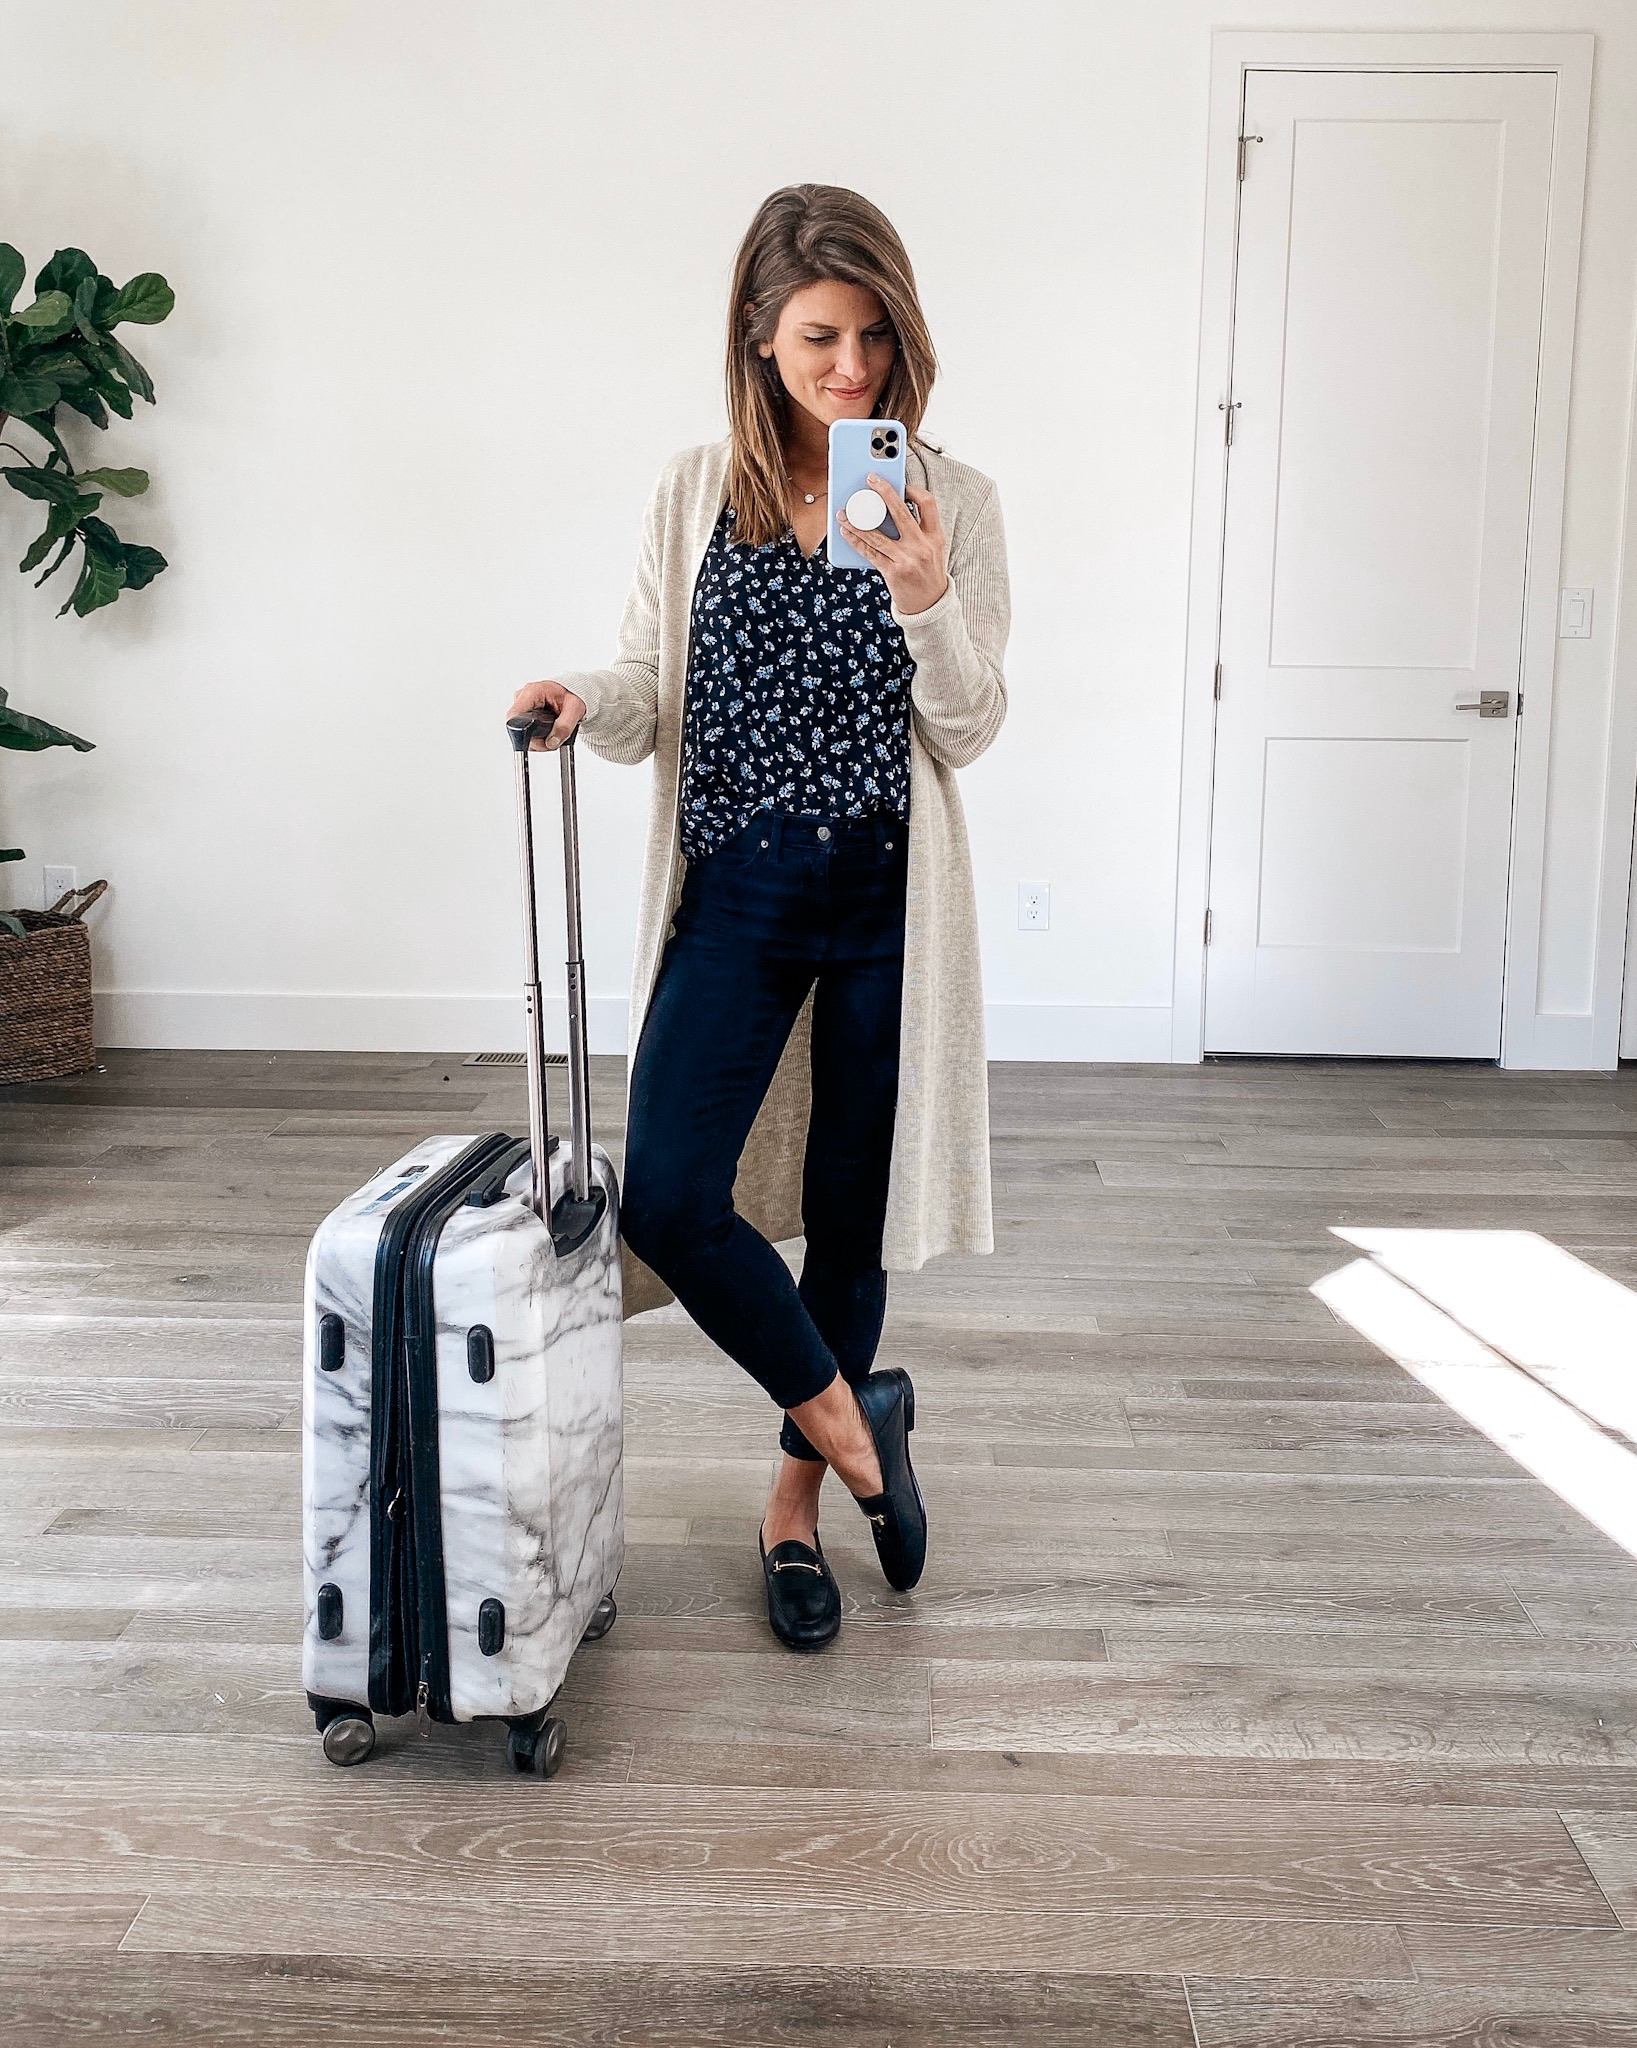 brighton keller wearing travel outfit with loafers and jeans and cami and cardigan